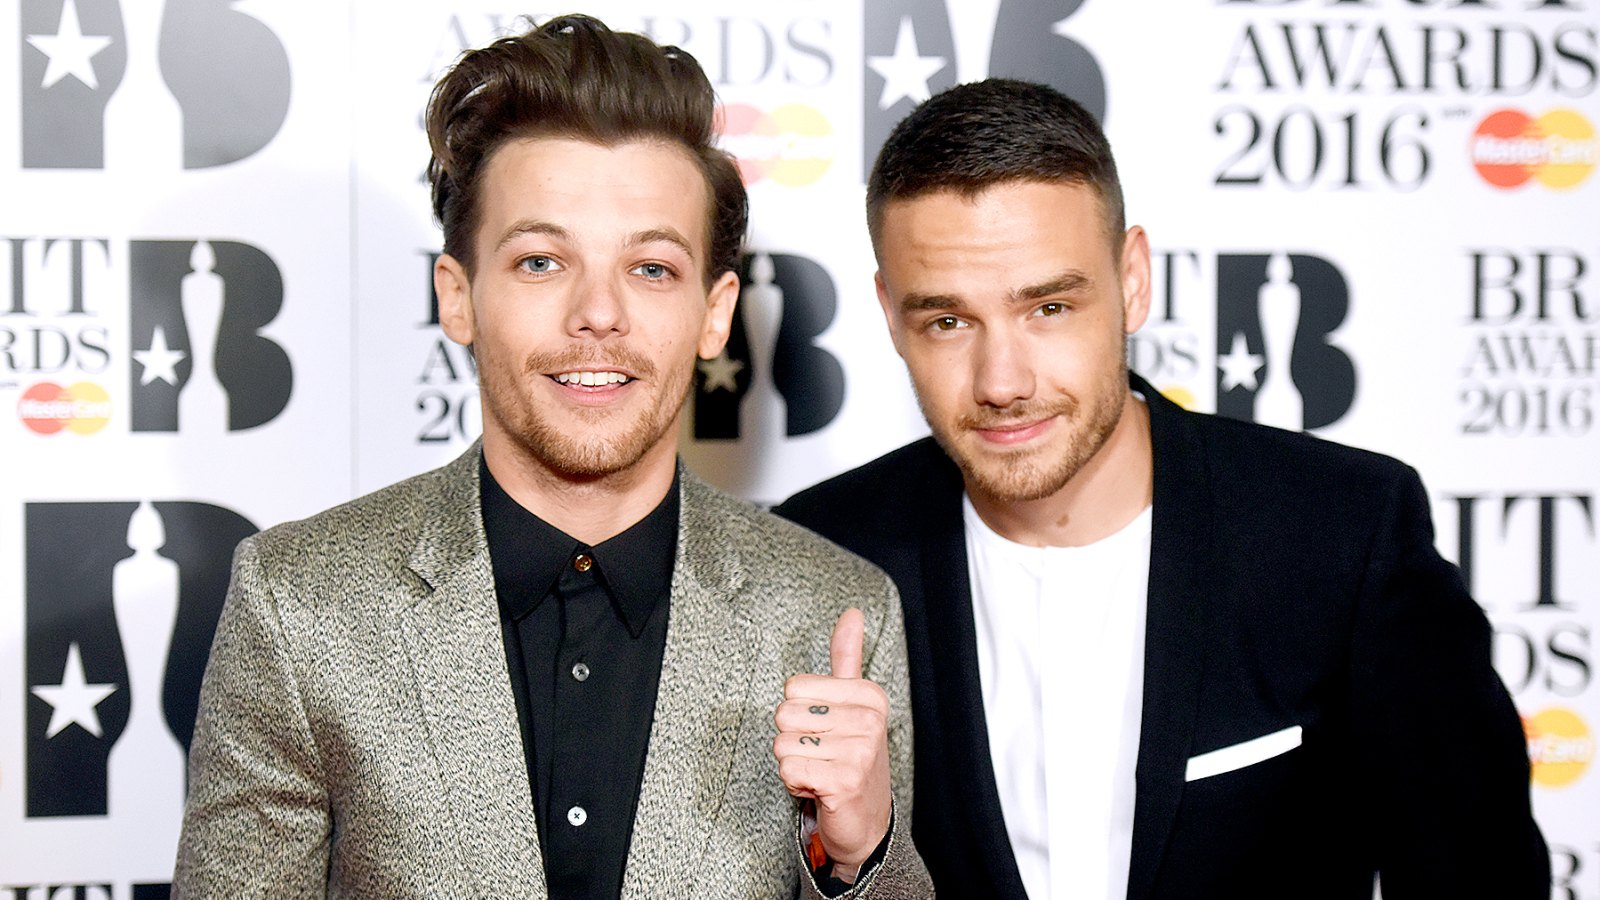 Louis Tomlinson and Liam Payne attend the BRIT Awards 2016 at The O2 Arena on February 24, 2016 in London, England.